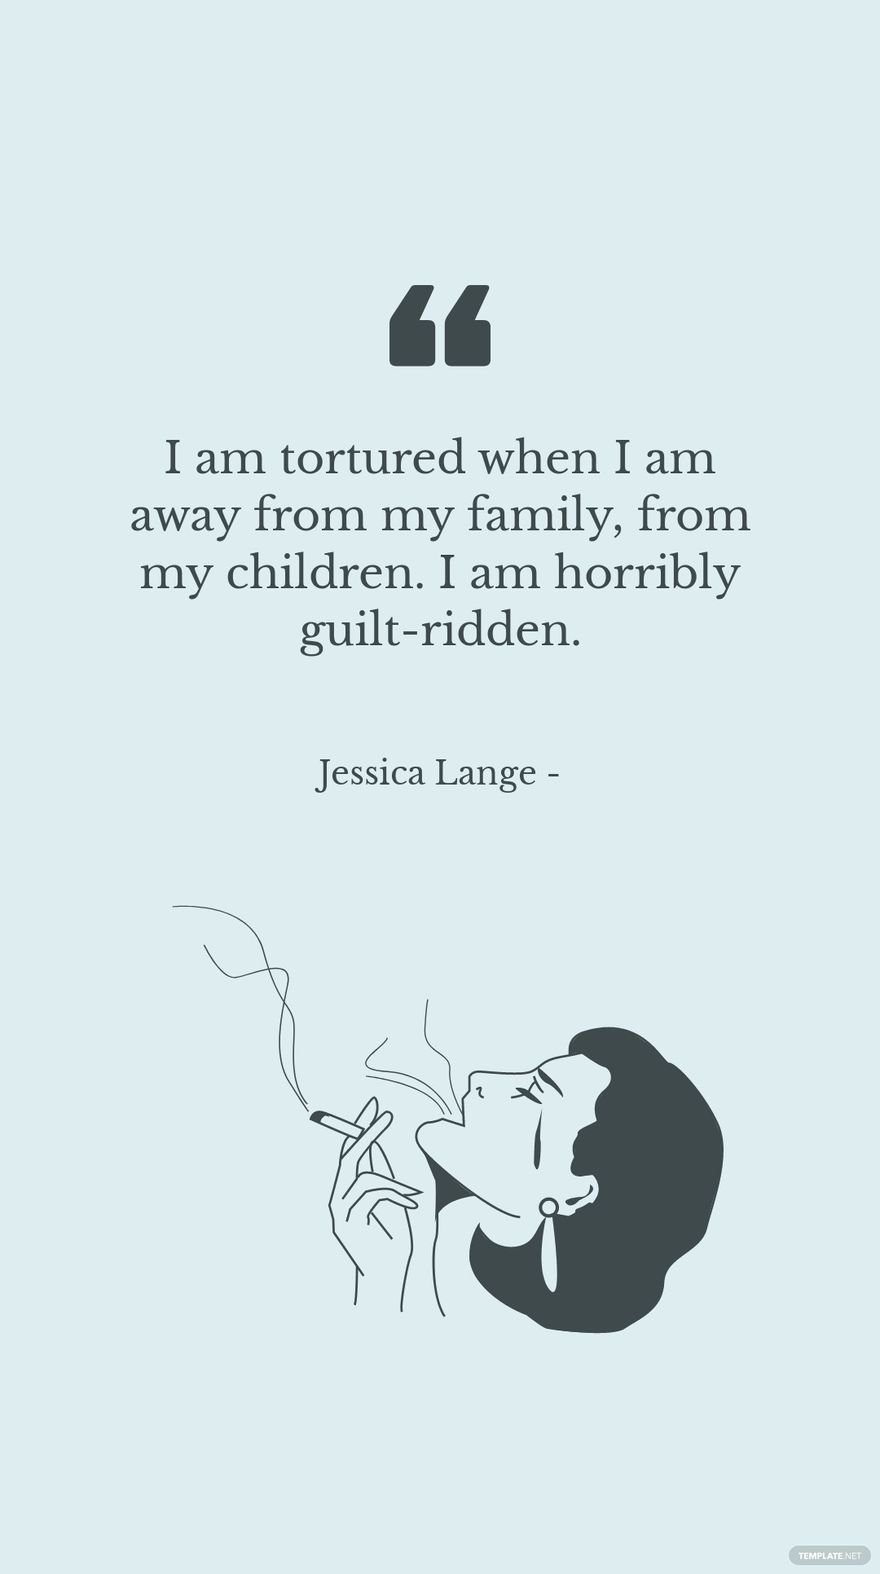 Free Jessica Lange - I am tortured when I am away from my family, from my children. I am horribly guilt-ridden. in JPG